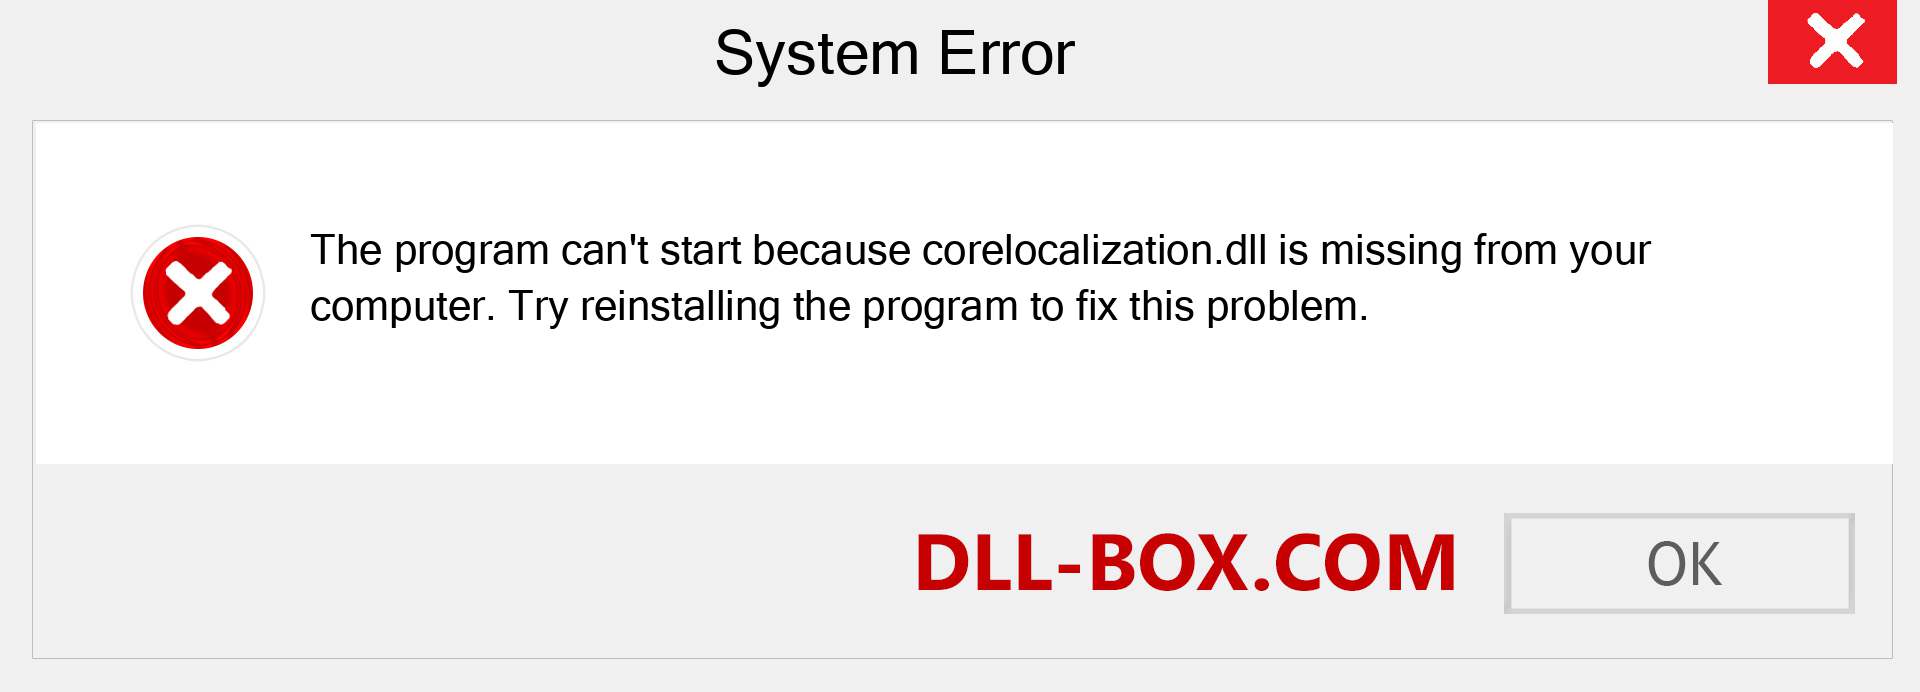  corelocalization.dll file is missing?. Download for Windows 7, 8, 10 - Fix  corelocalization dll Missing Error on Windows, photos, images